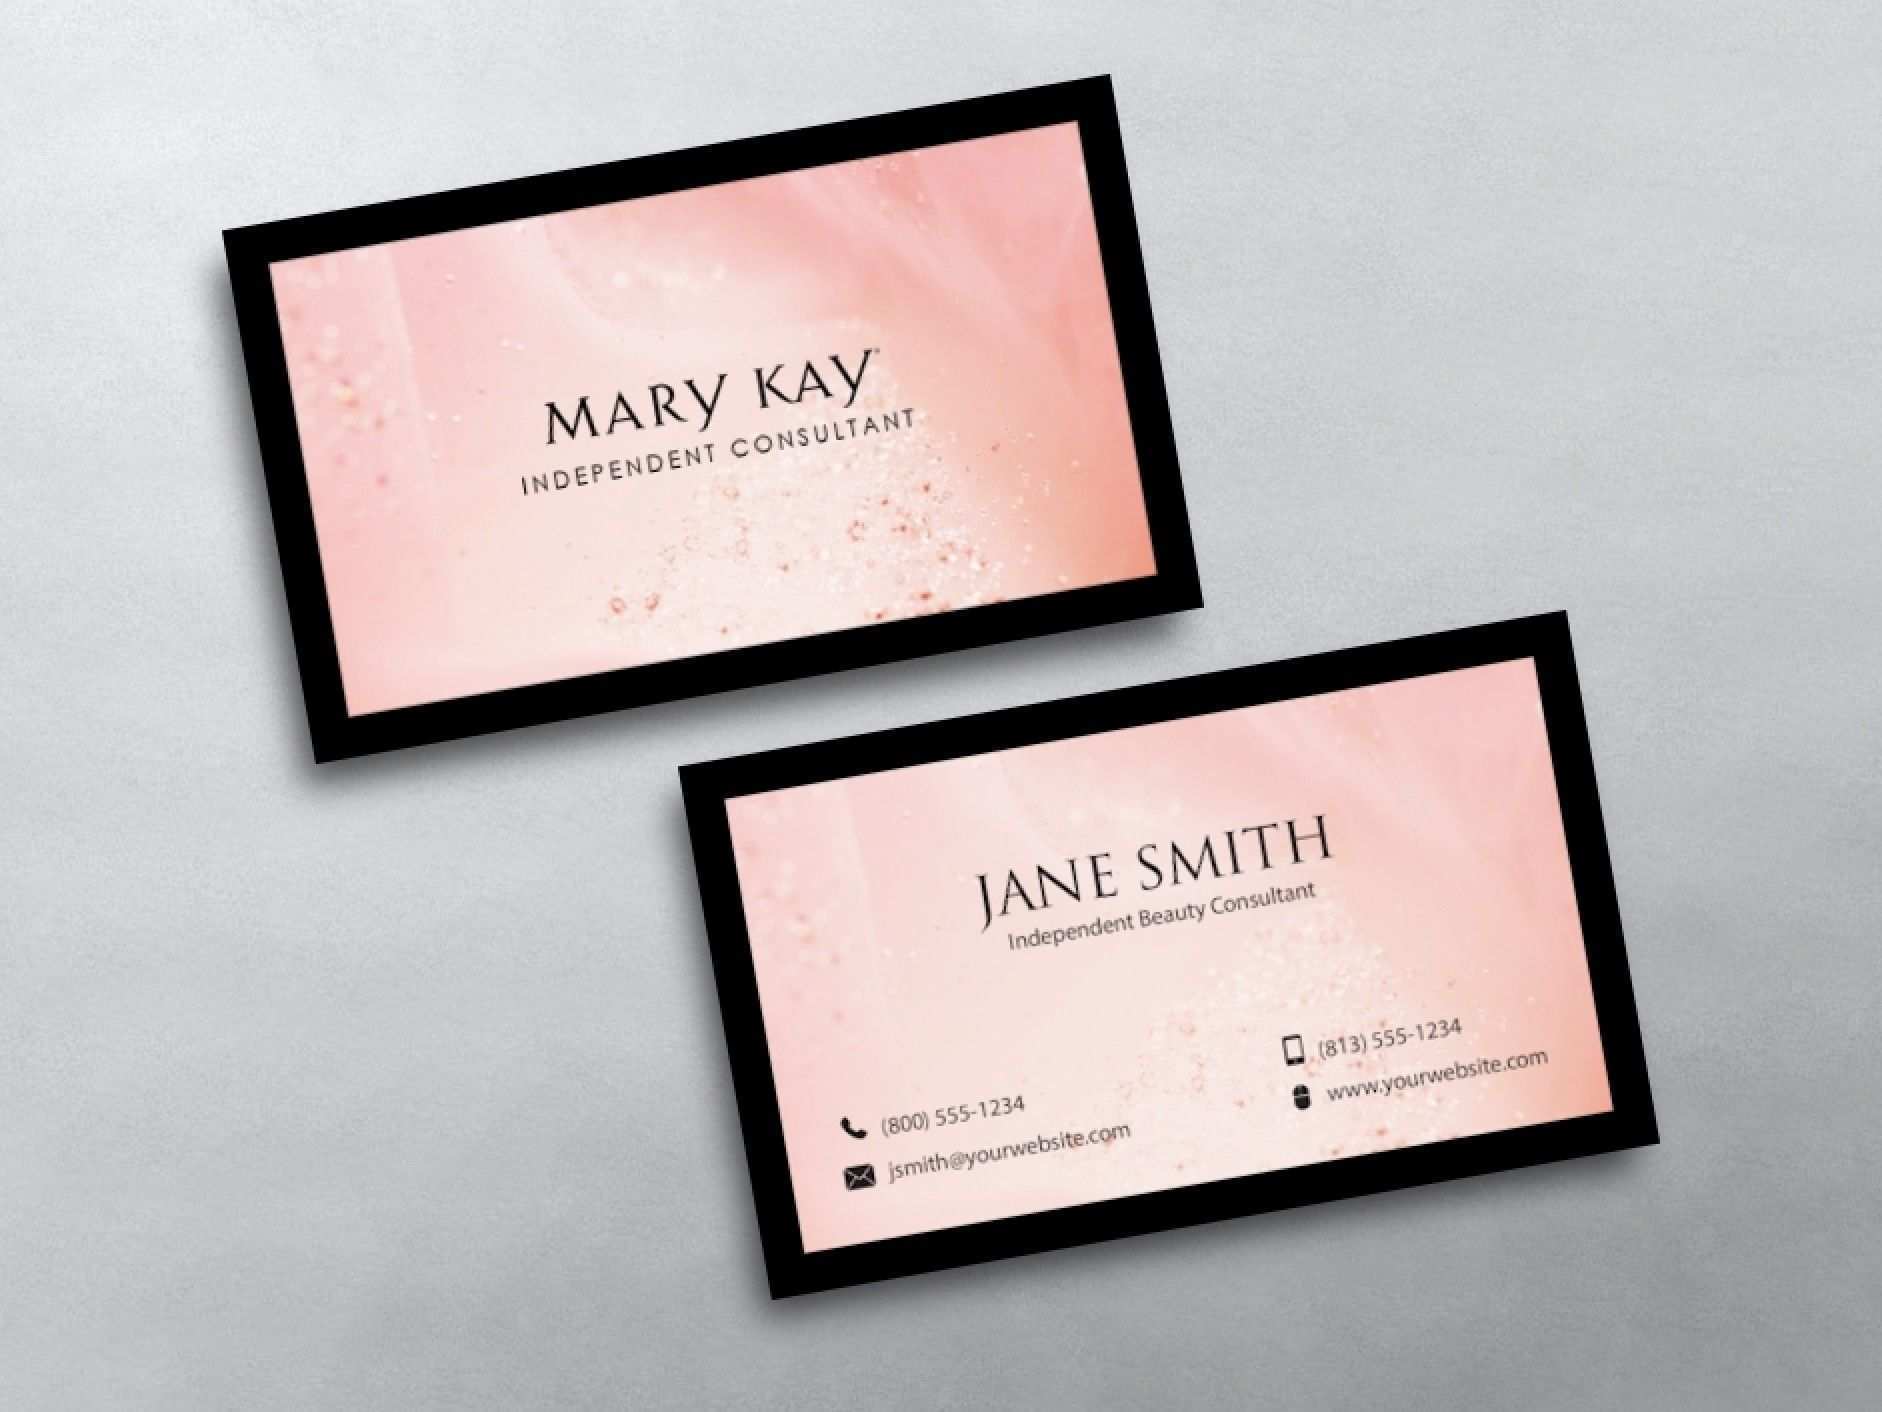 21 The Best Mary Kay Business Card Templates With Stunning Design Regarding Mary Kay Business Cards Templates Free